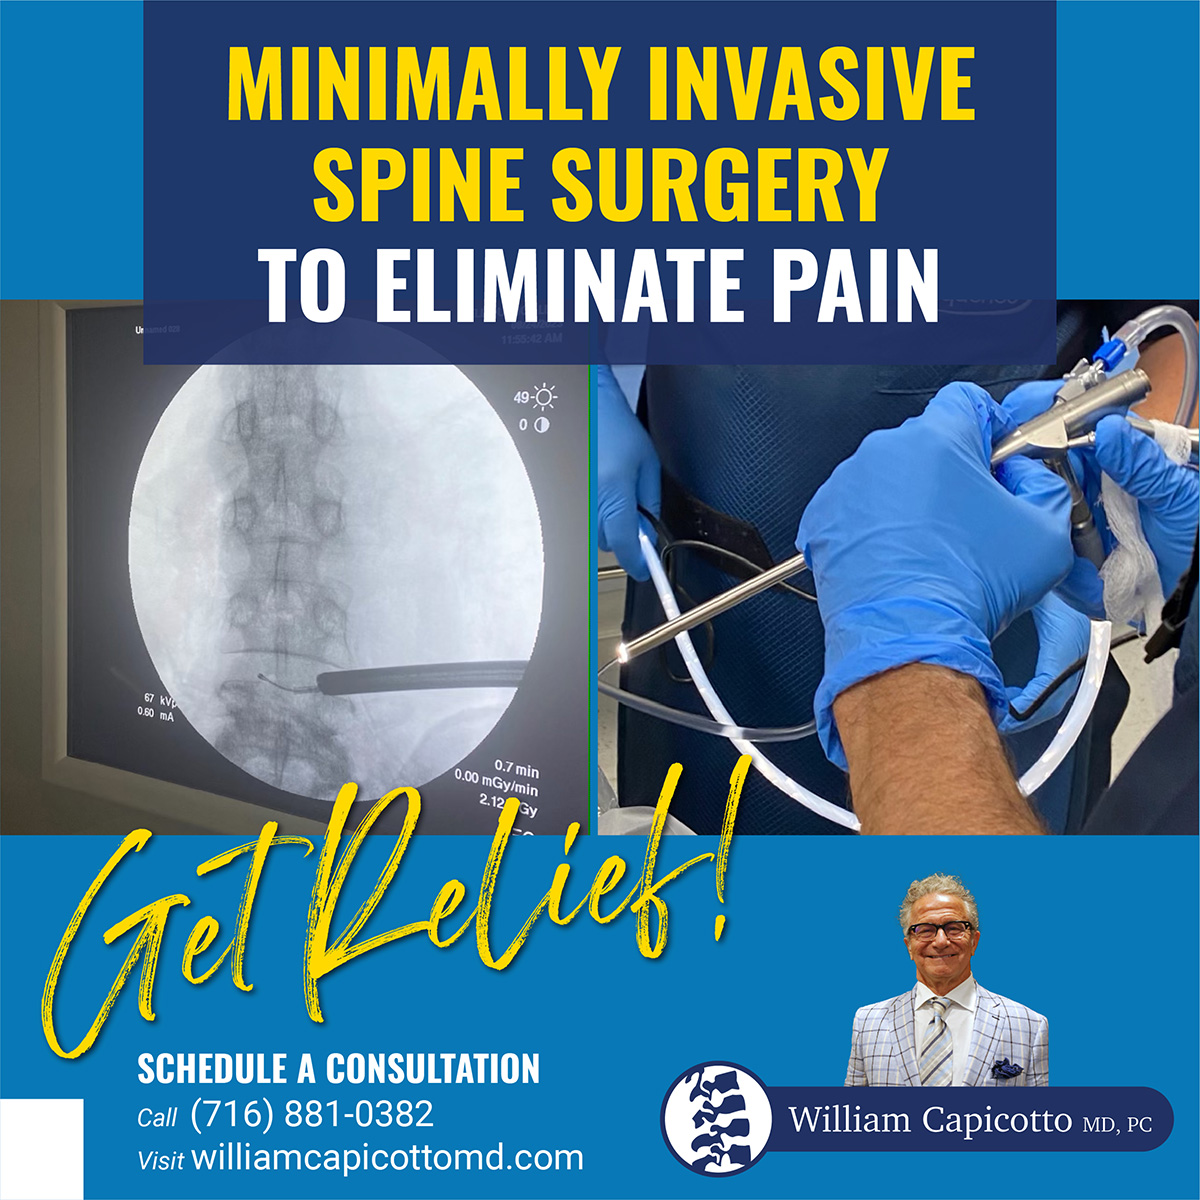 At William Capicotto MD we use the latest technology and state-of-the-art equipment to perform minimally invasive spine surgery.